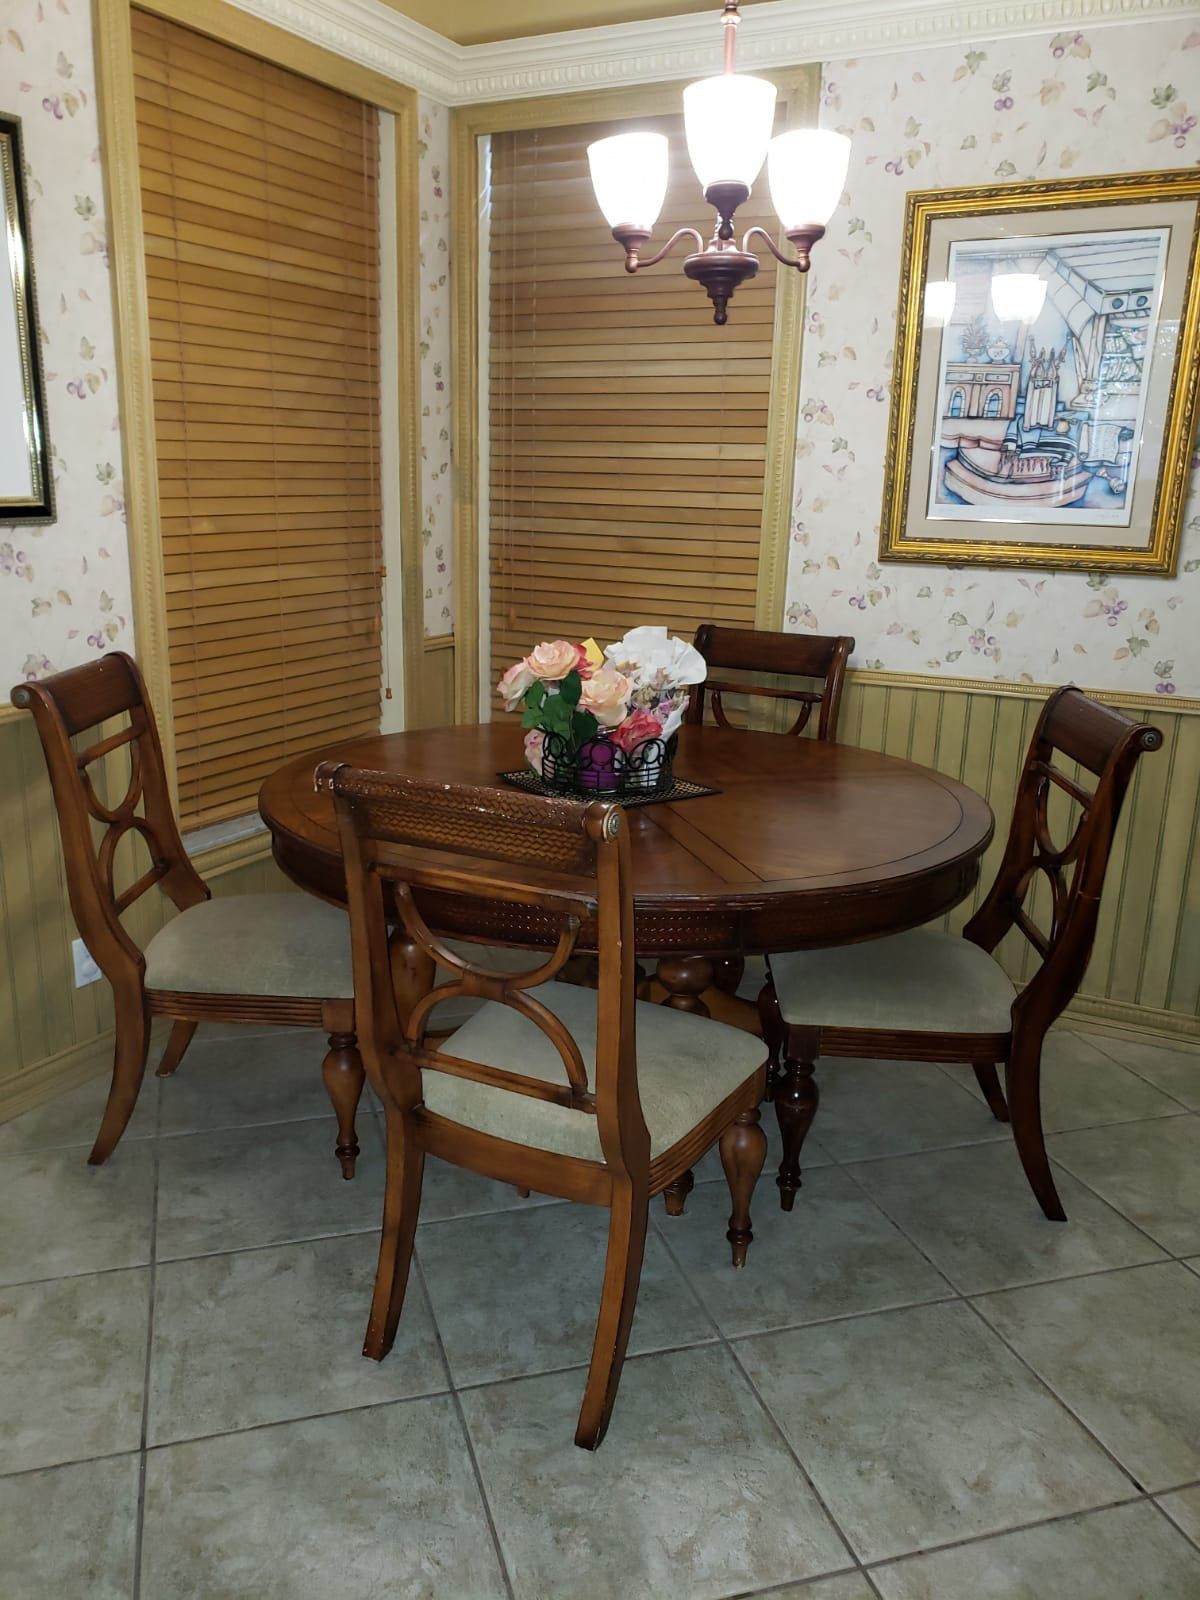 Breakfast table with 6 chairs